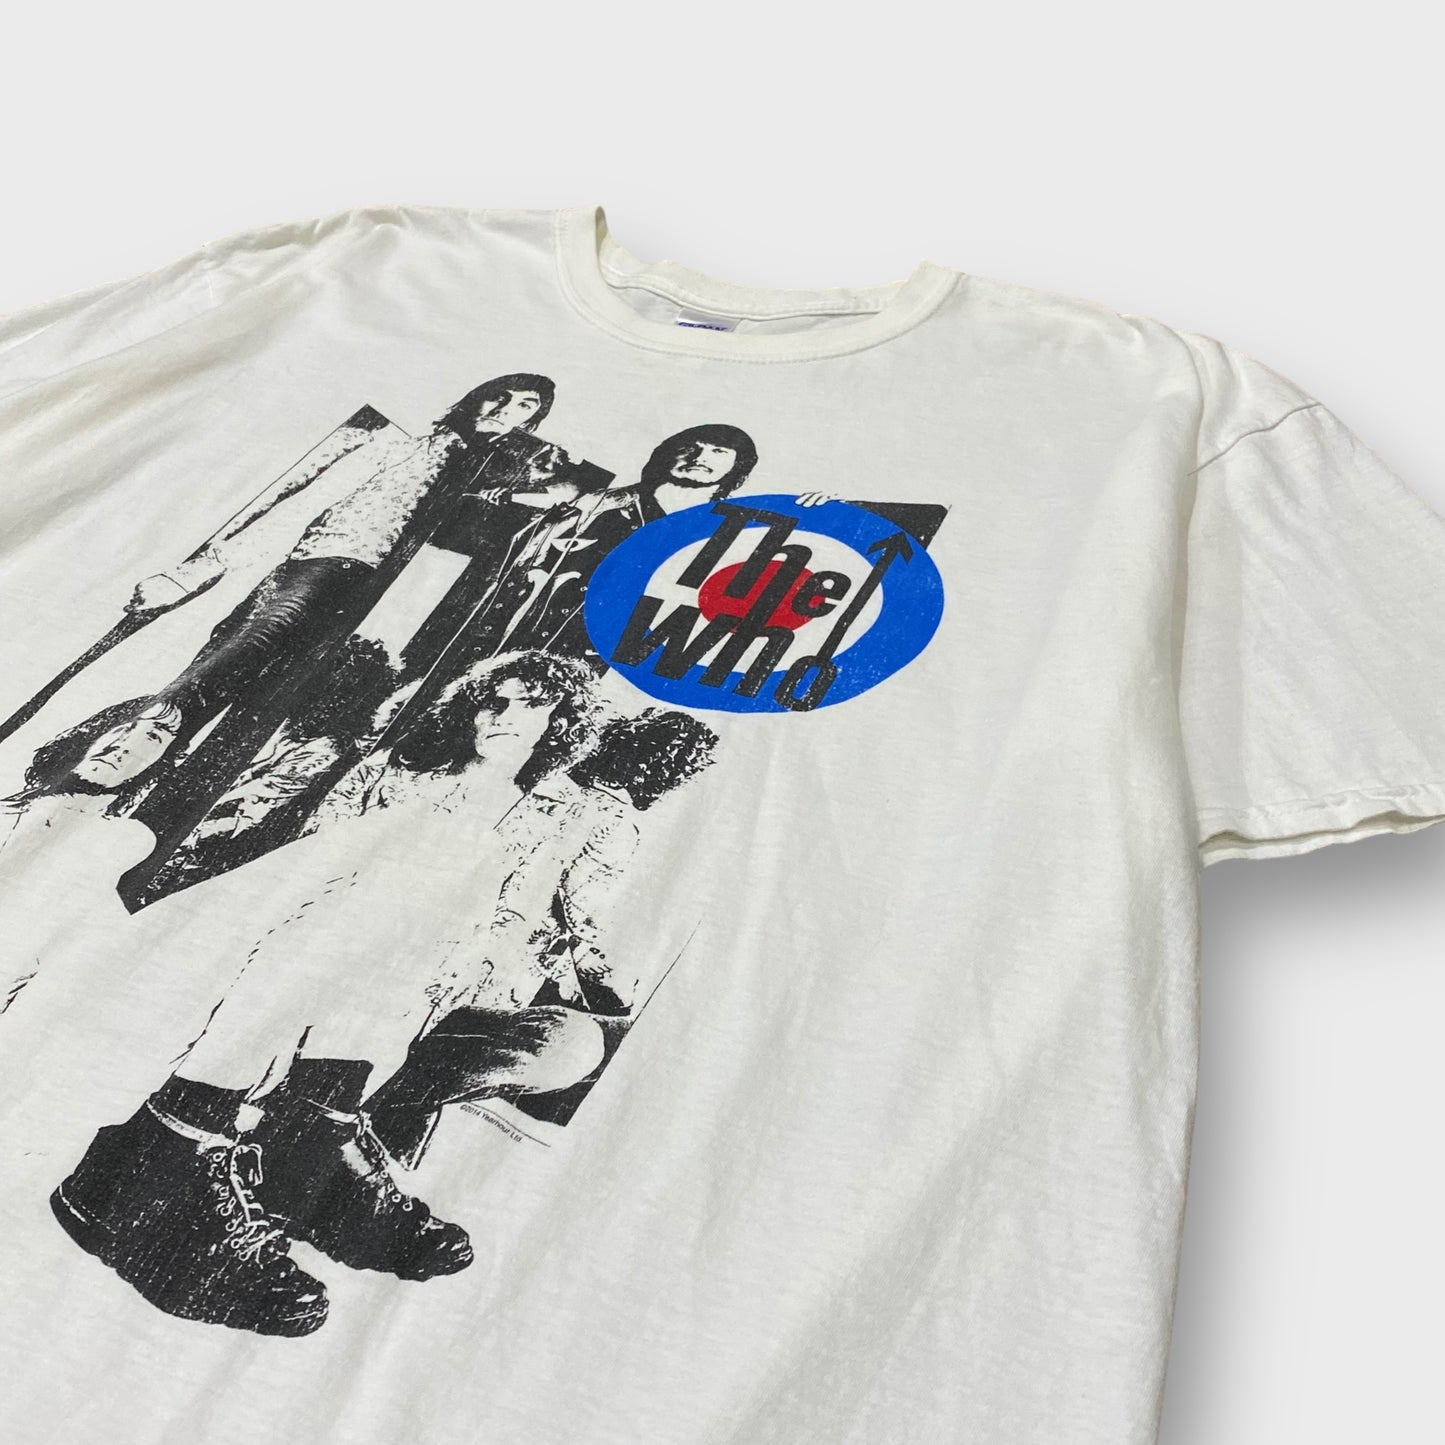 "The who" band t-shirt